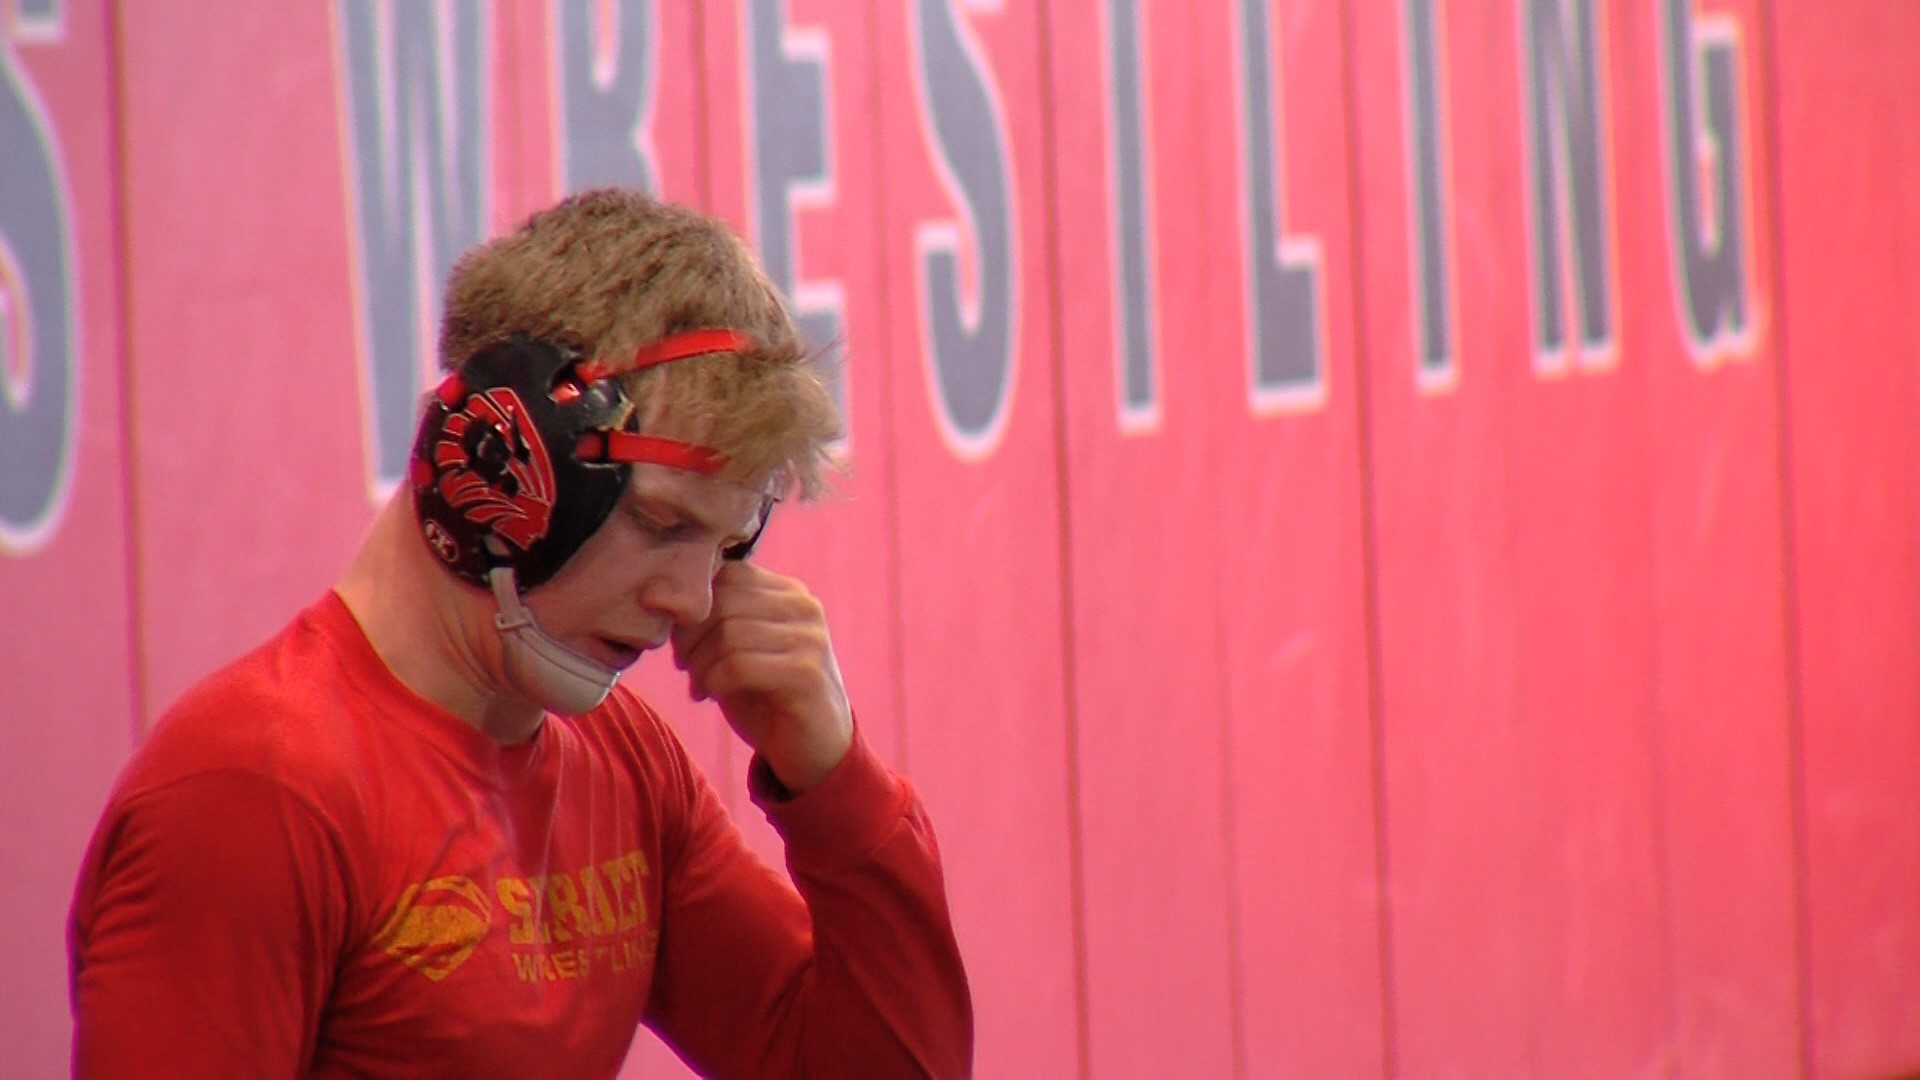 Matthew Lewis is looking to become the 29th wrestler in Iowa High School Wrestling history to win four state titles